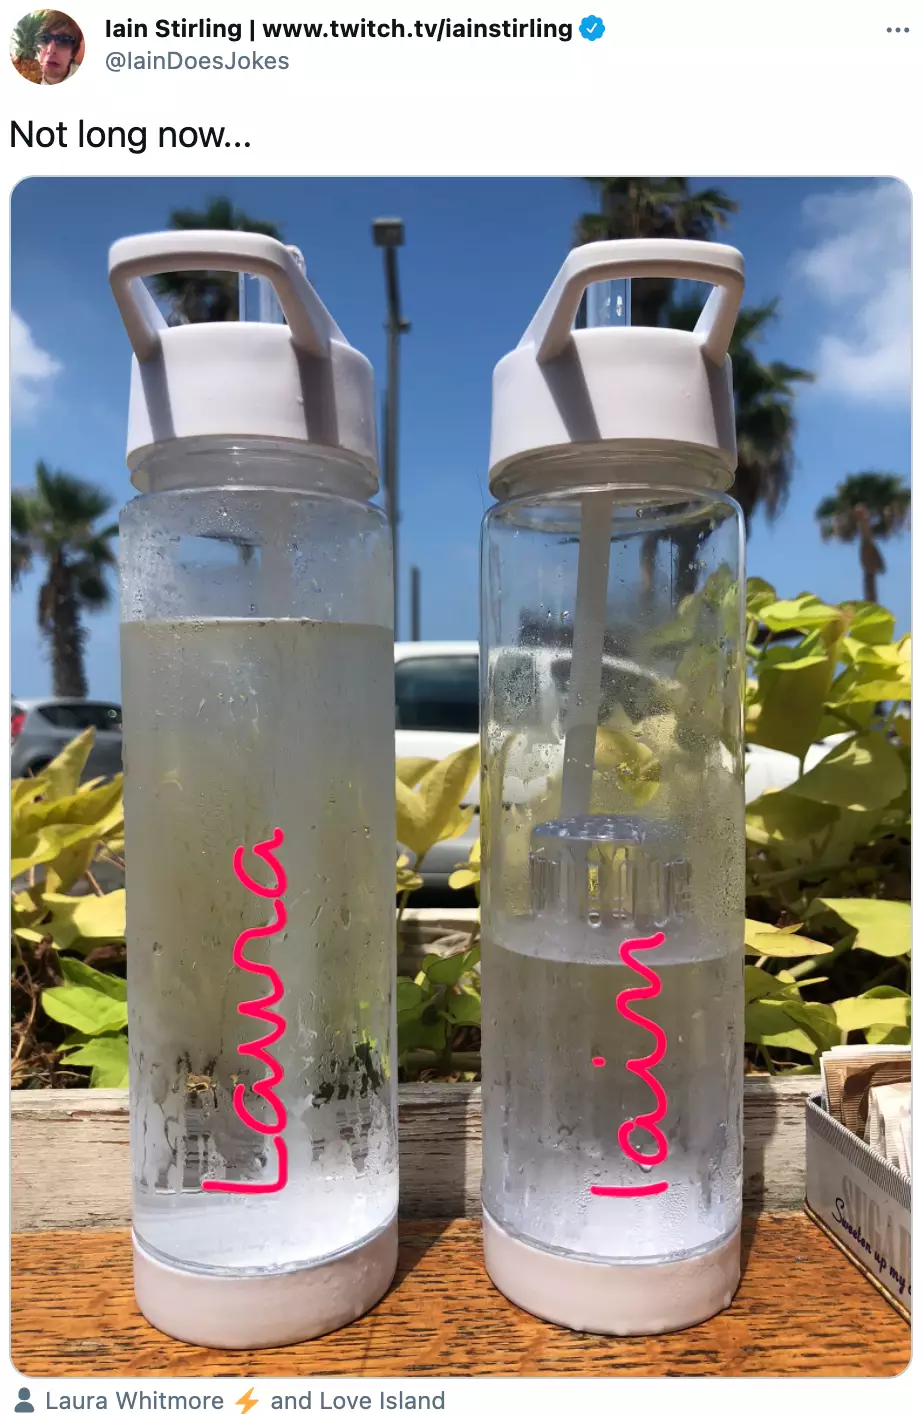 Narrator Iain Stirling teased the new series on Tuesday by posting a side-by-side shot of his and Laura Whitmore's Love Island water bottles (